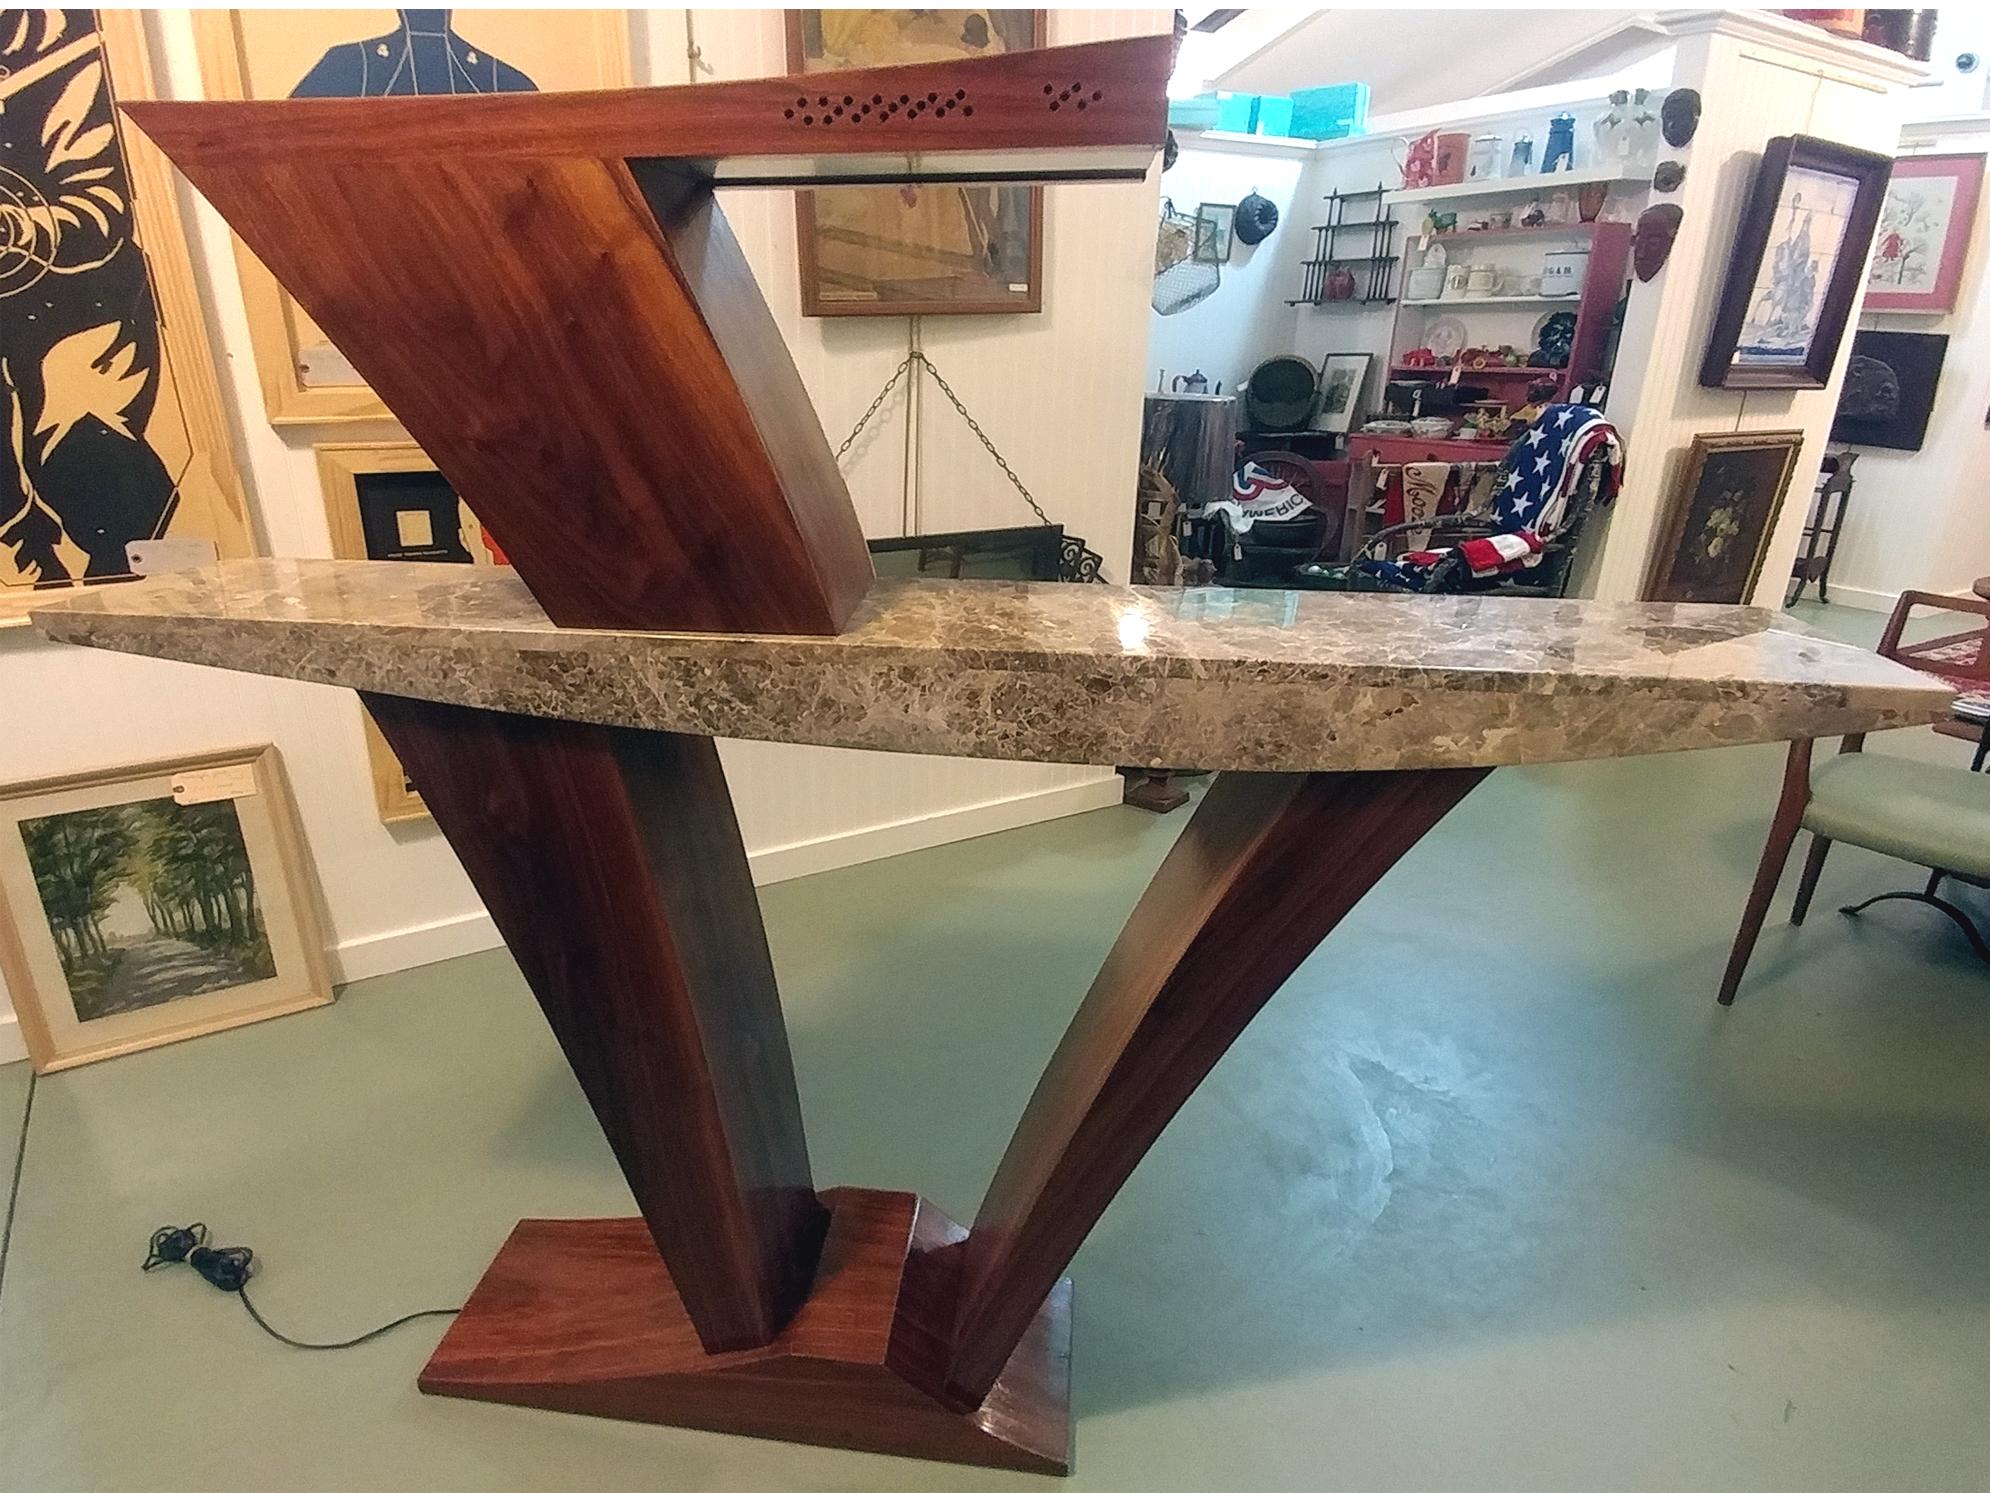 One of a kind bespoke vintage Italian dry bar cocktail table. Constructed in 2 parts, a sculpted marble top with honeycomb like 3 drawers and recessed lighting beneath contour roofing. Set on top an asymmetrical rosewood pedestal base. Unusual